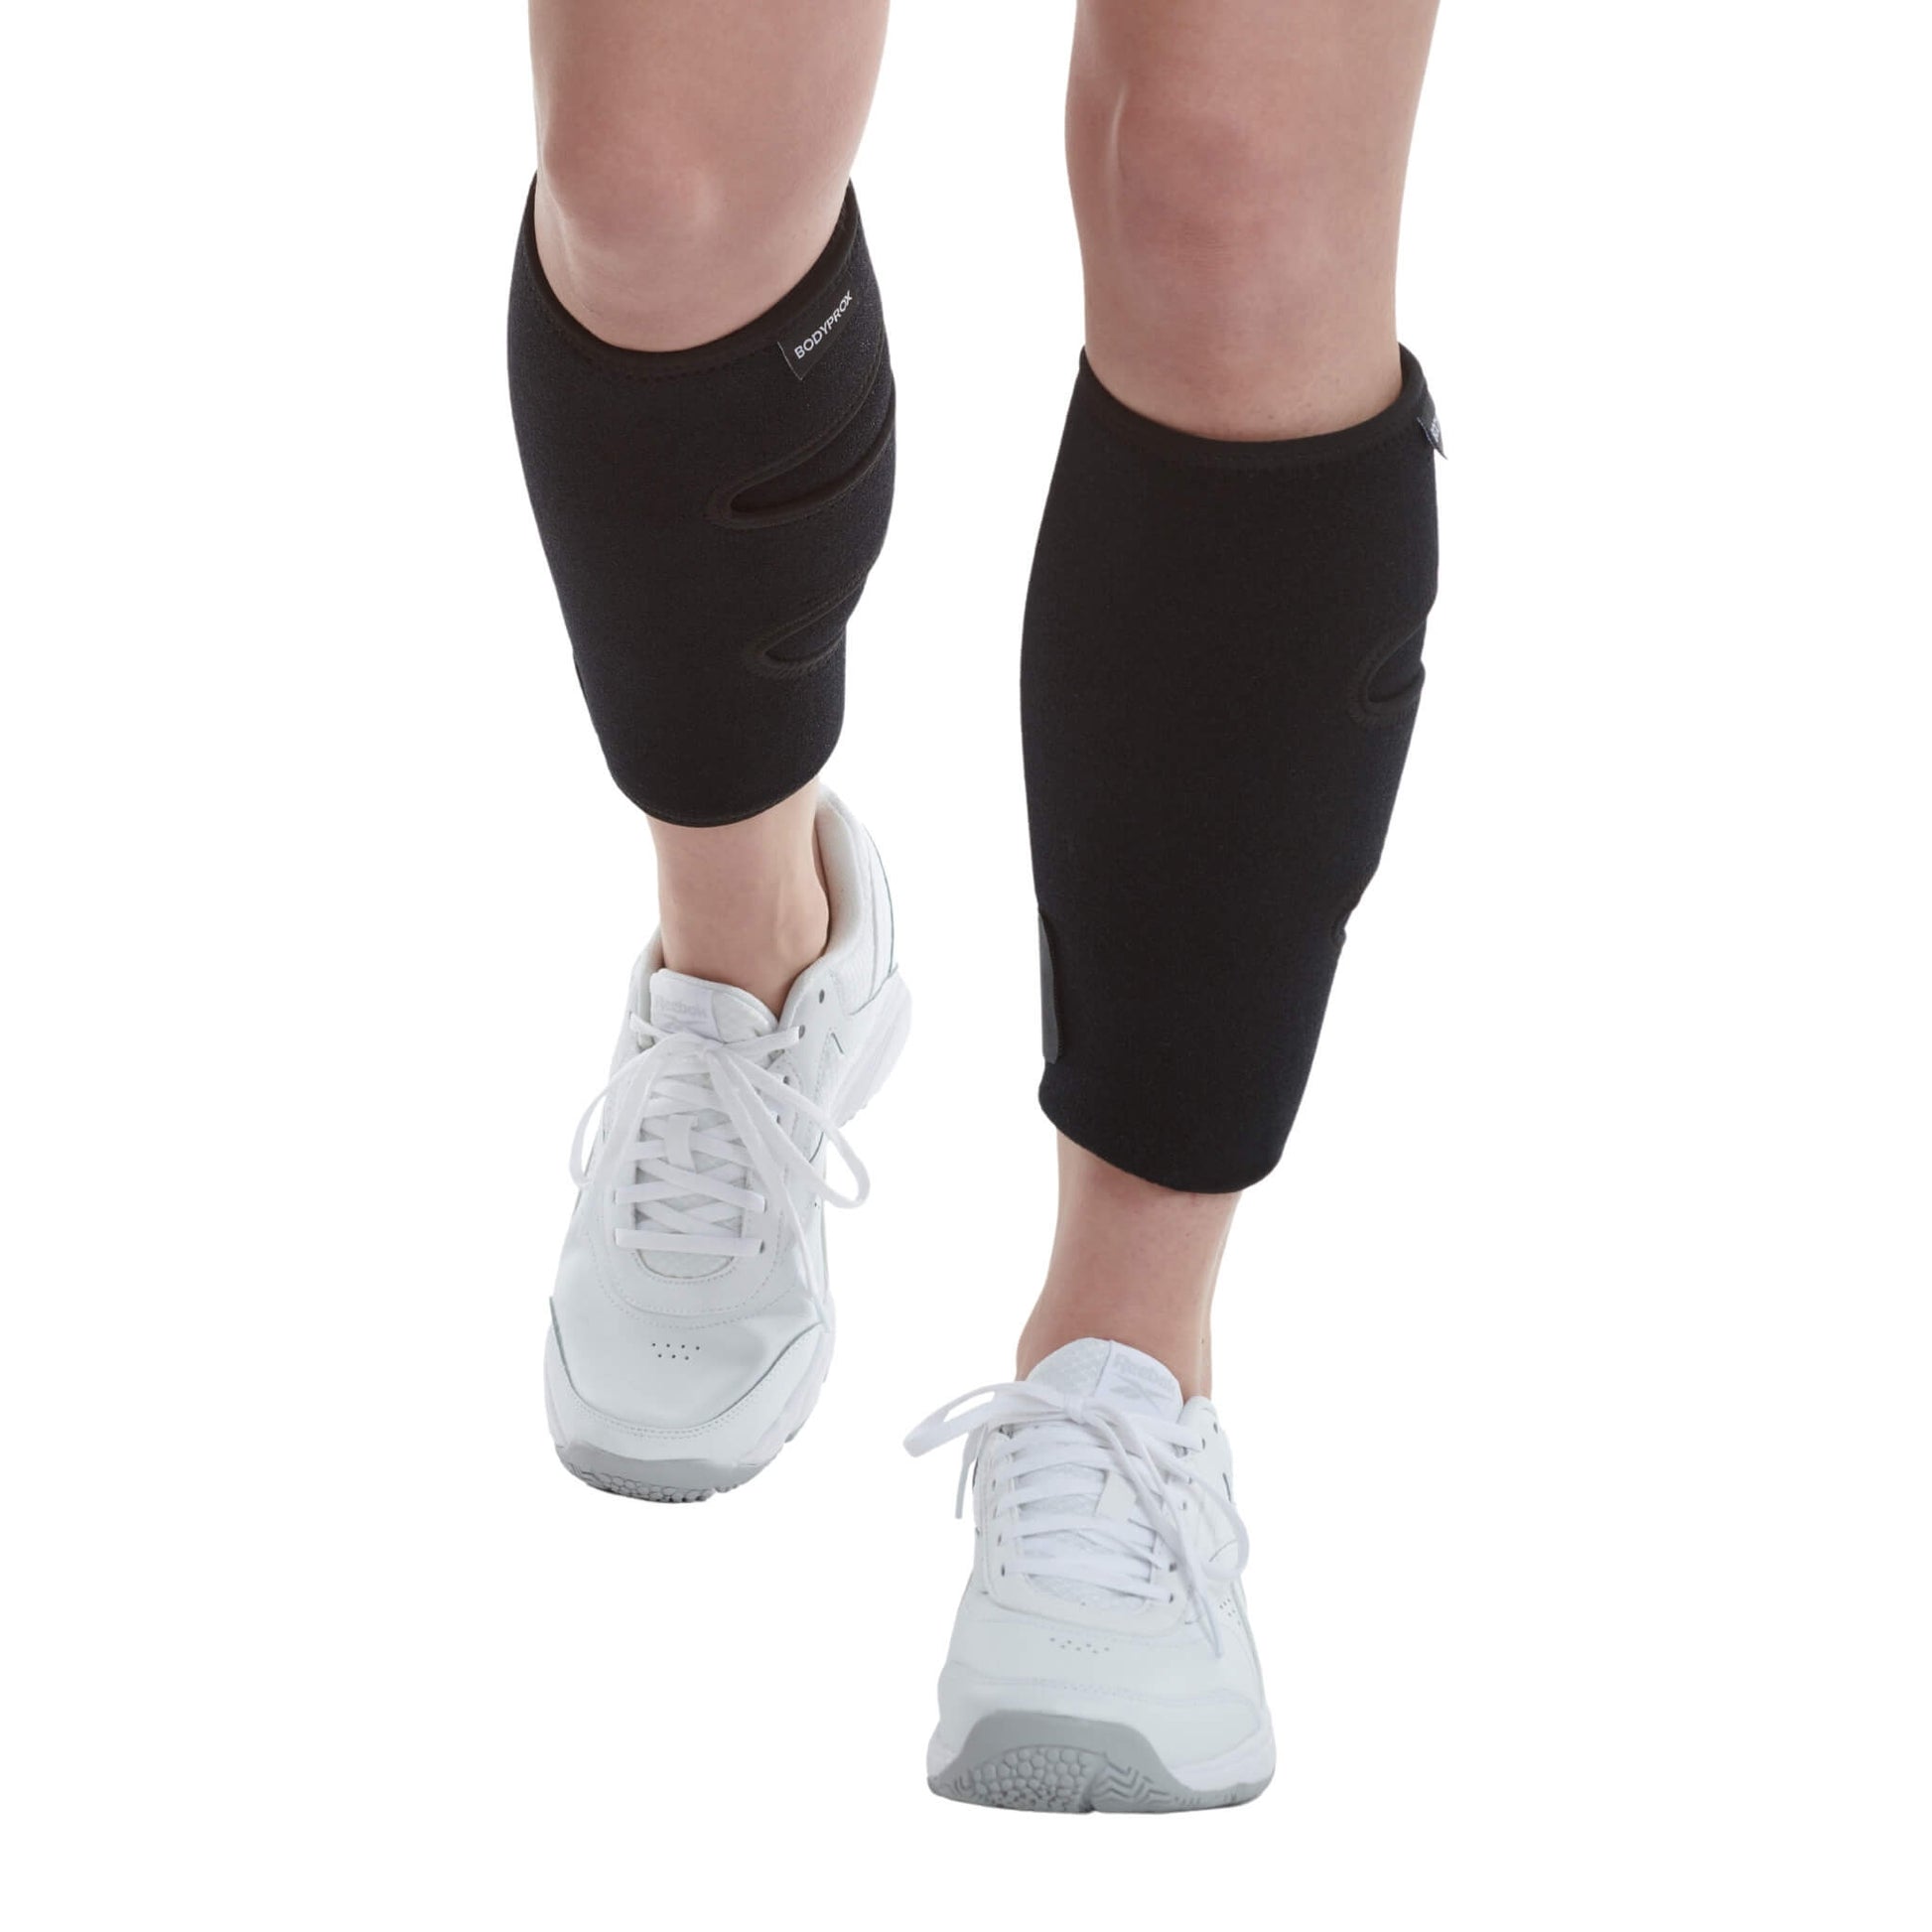 Calf Compression Sleeves- Shin Splints and Calf Support Brace